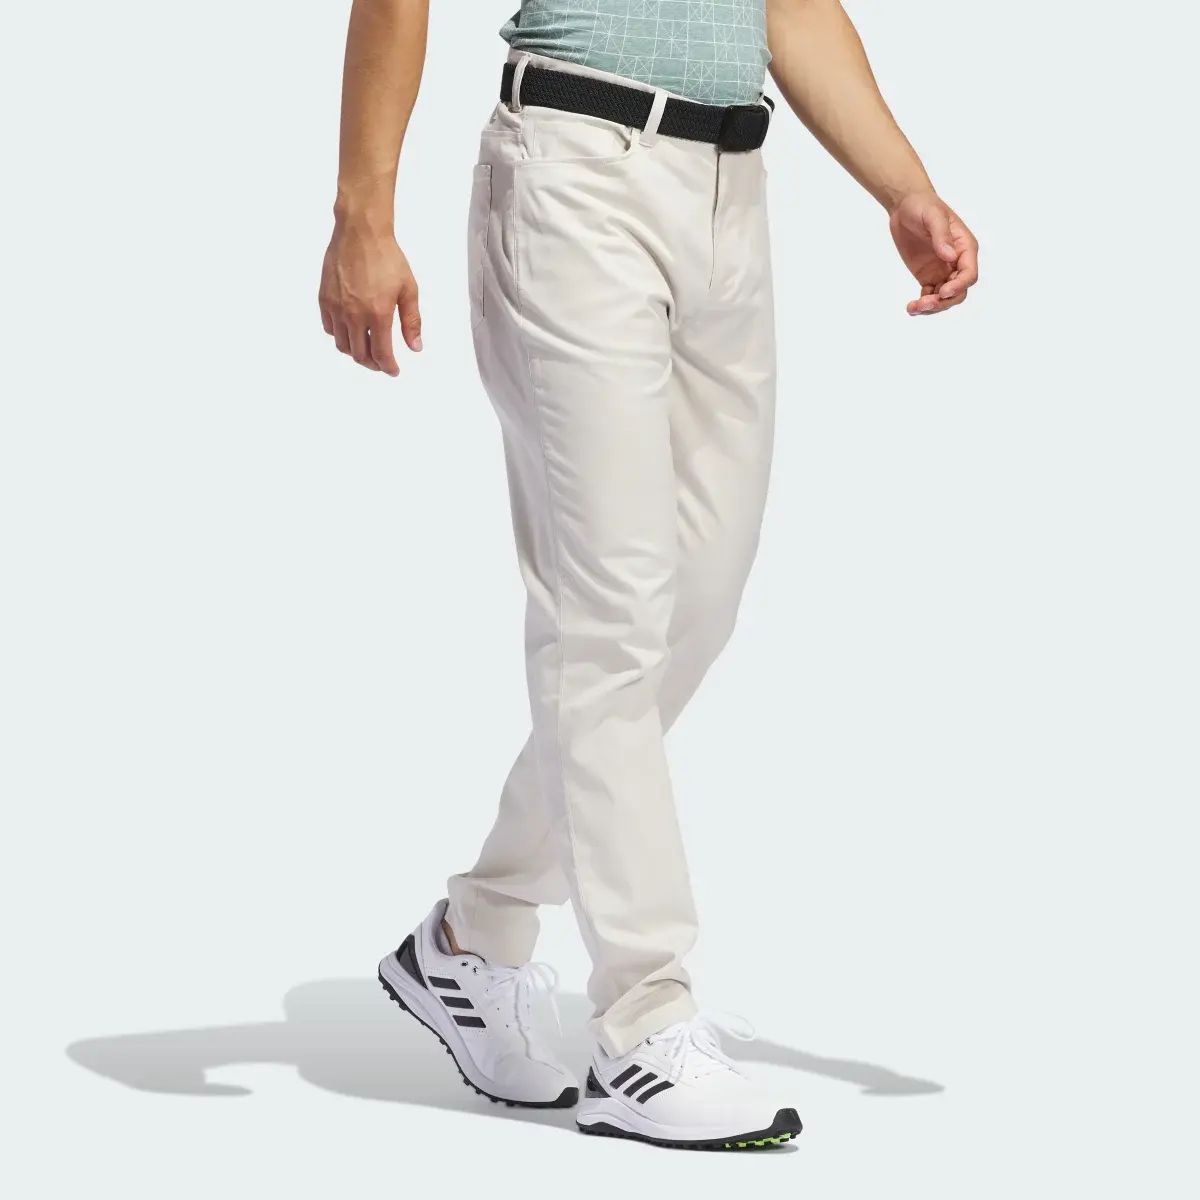 Adidas Go-To 5-Pocket Golf Trousers. 3